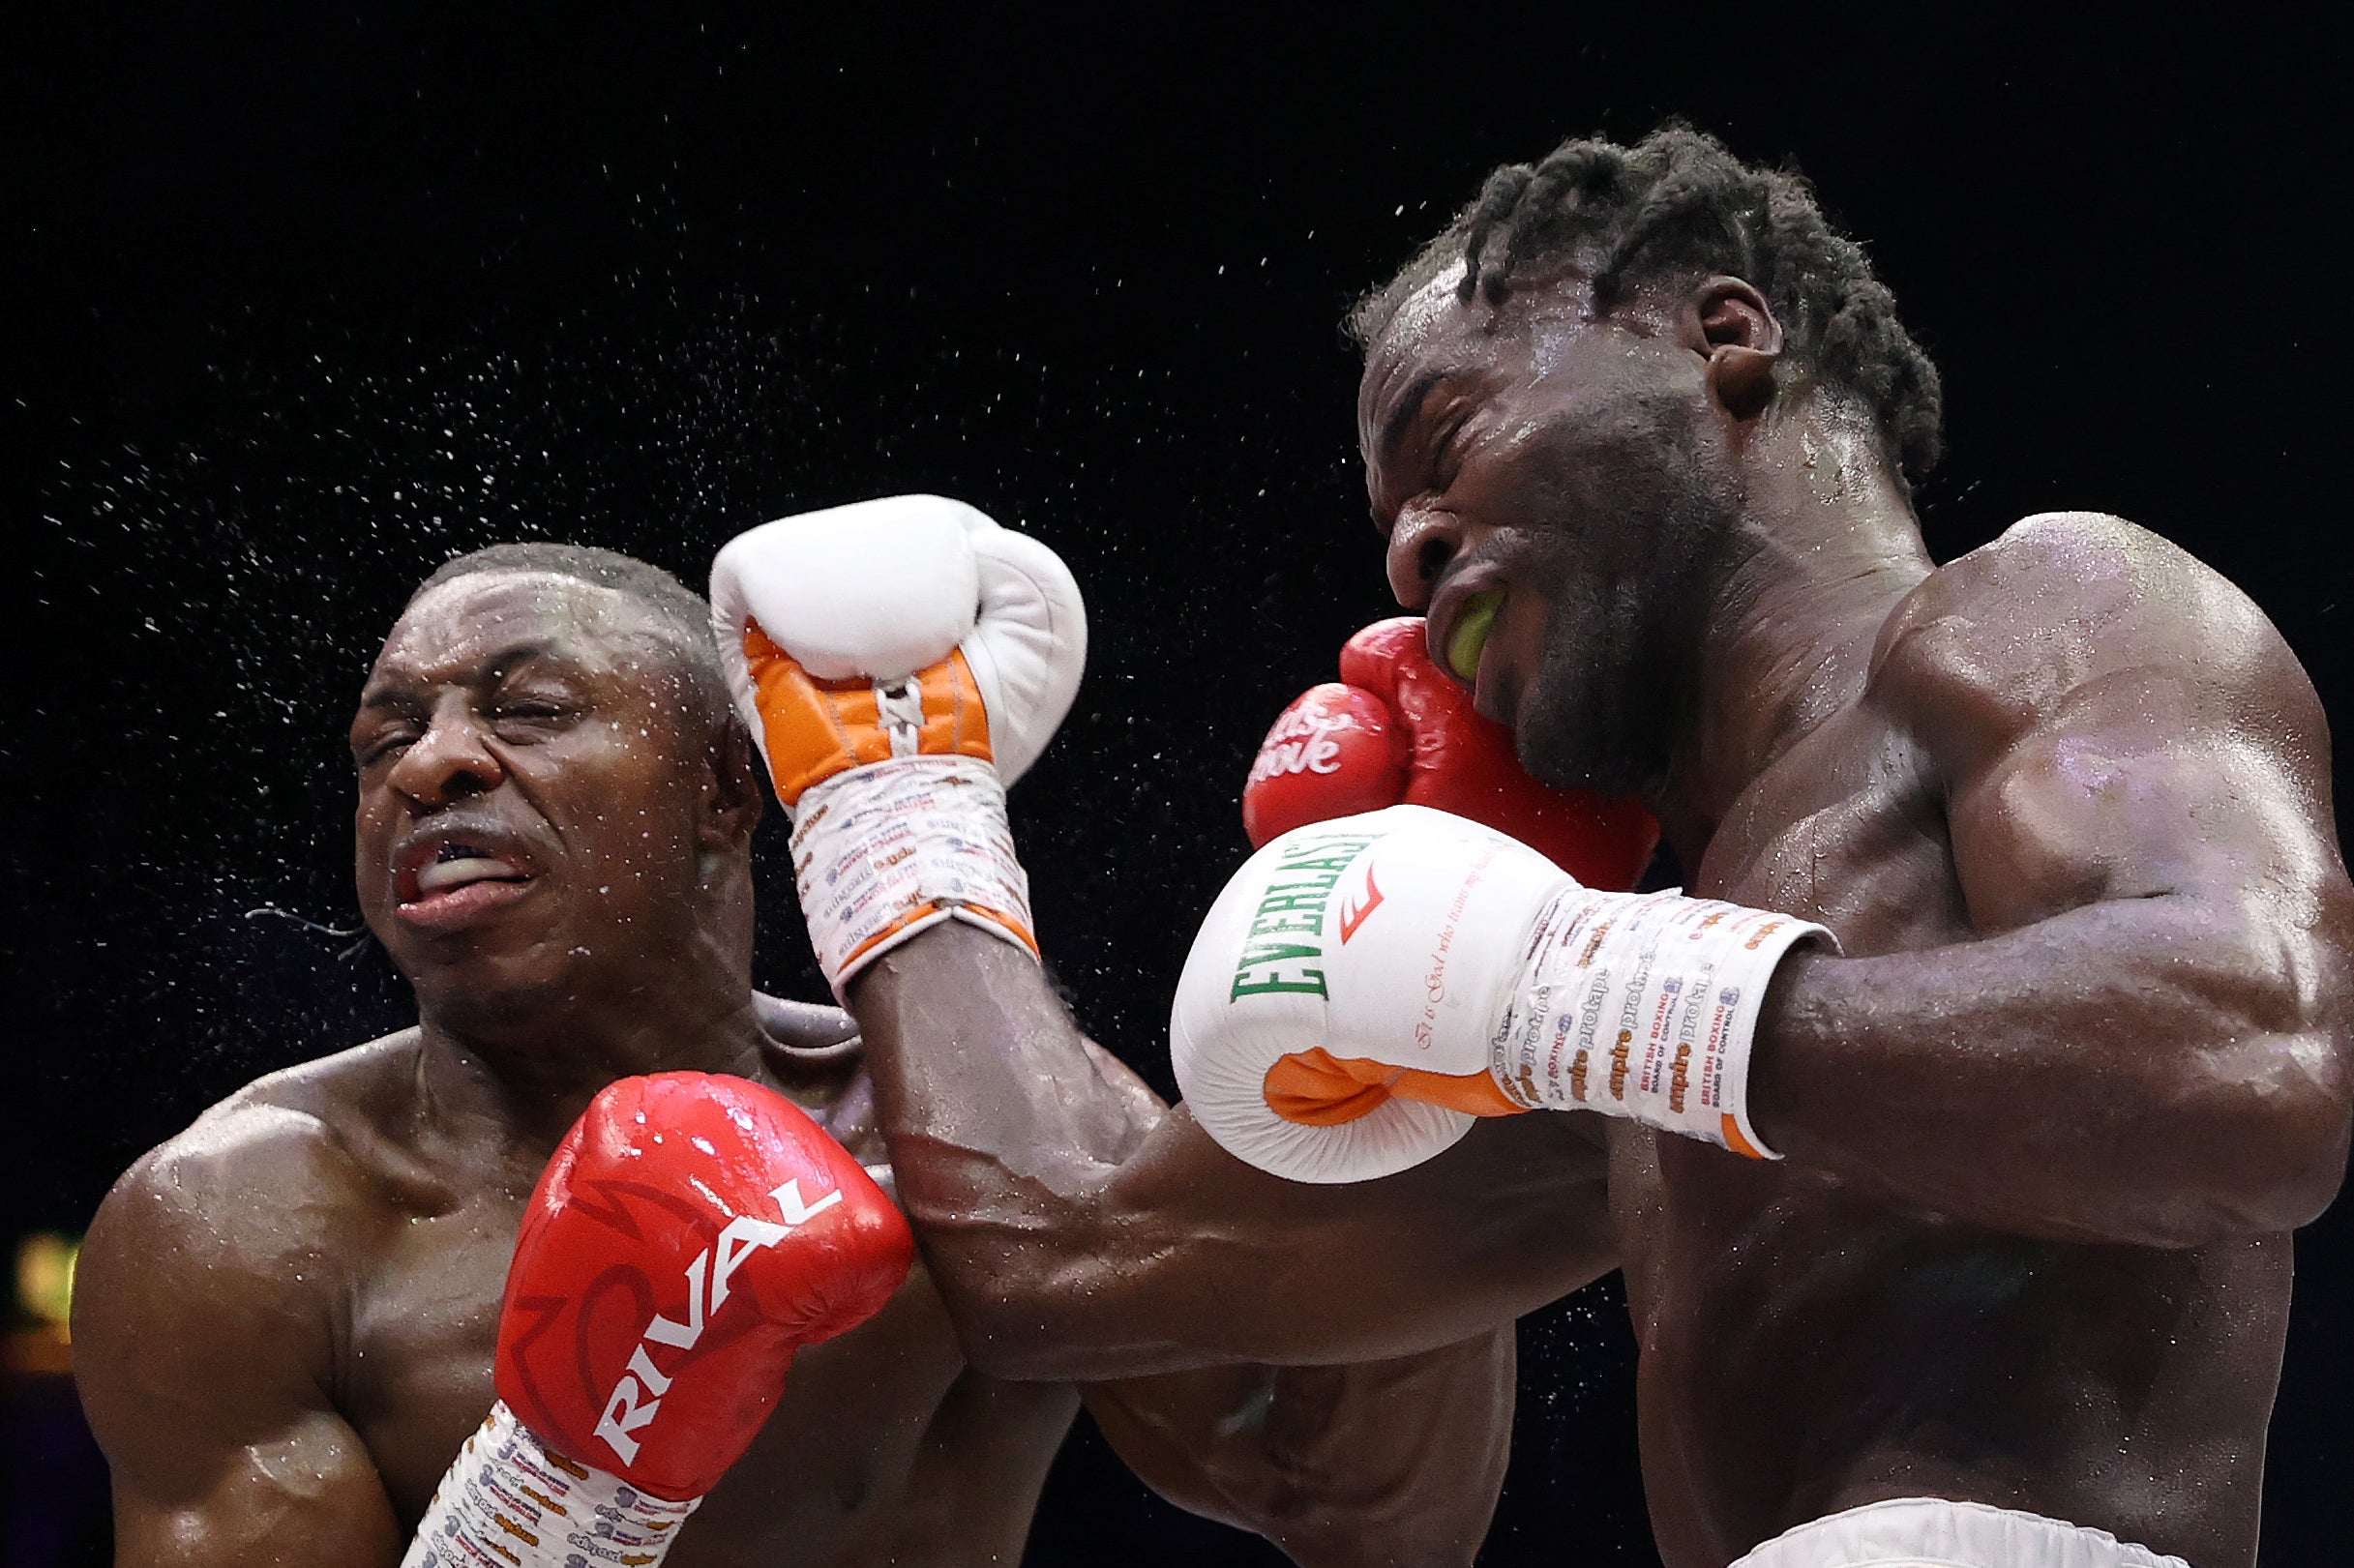 Buatsi (right) secured a decision win over Azeez